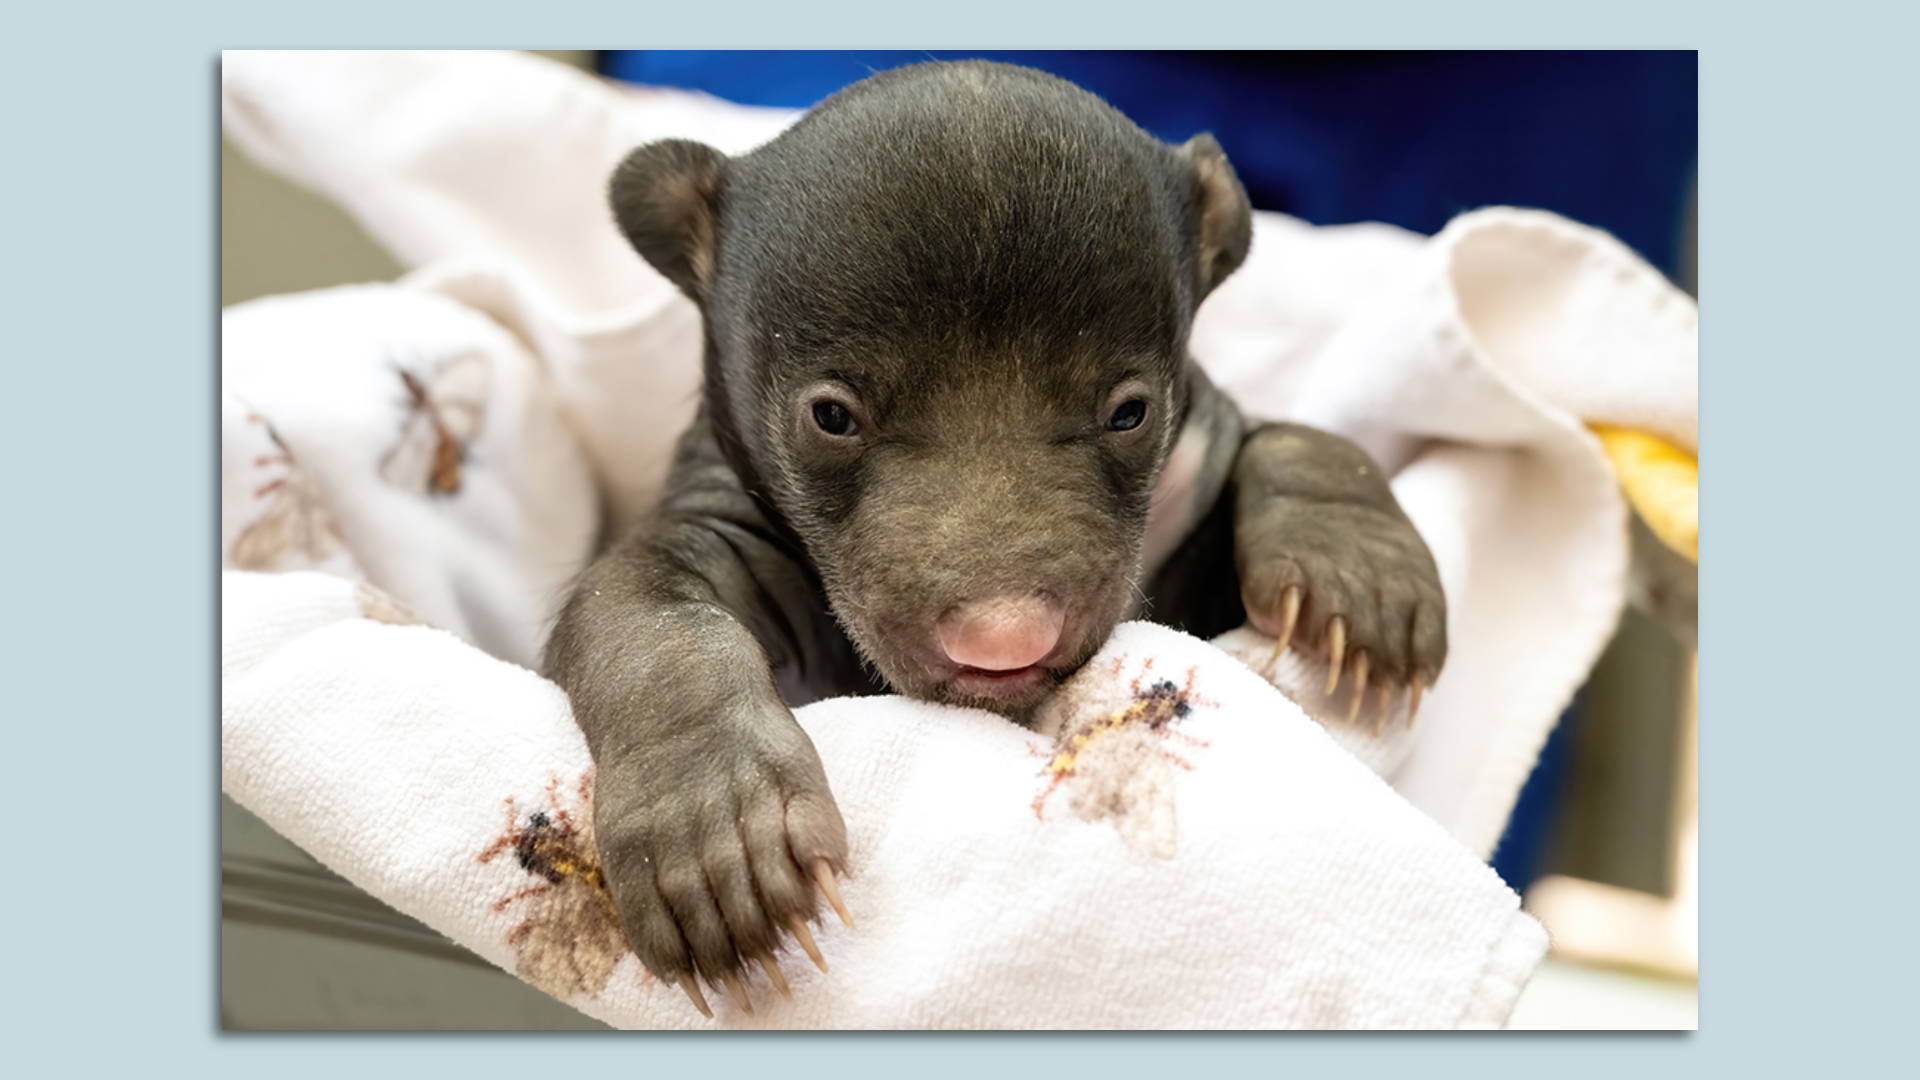 A baby sloth bear swaddled in a blanket.